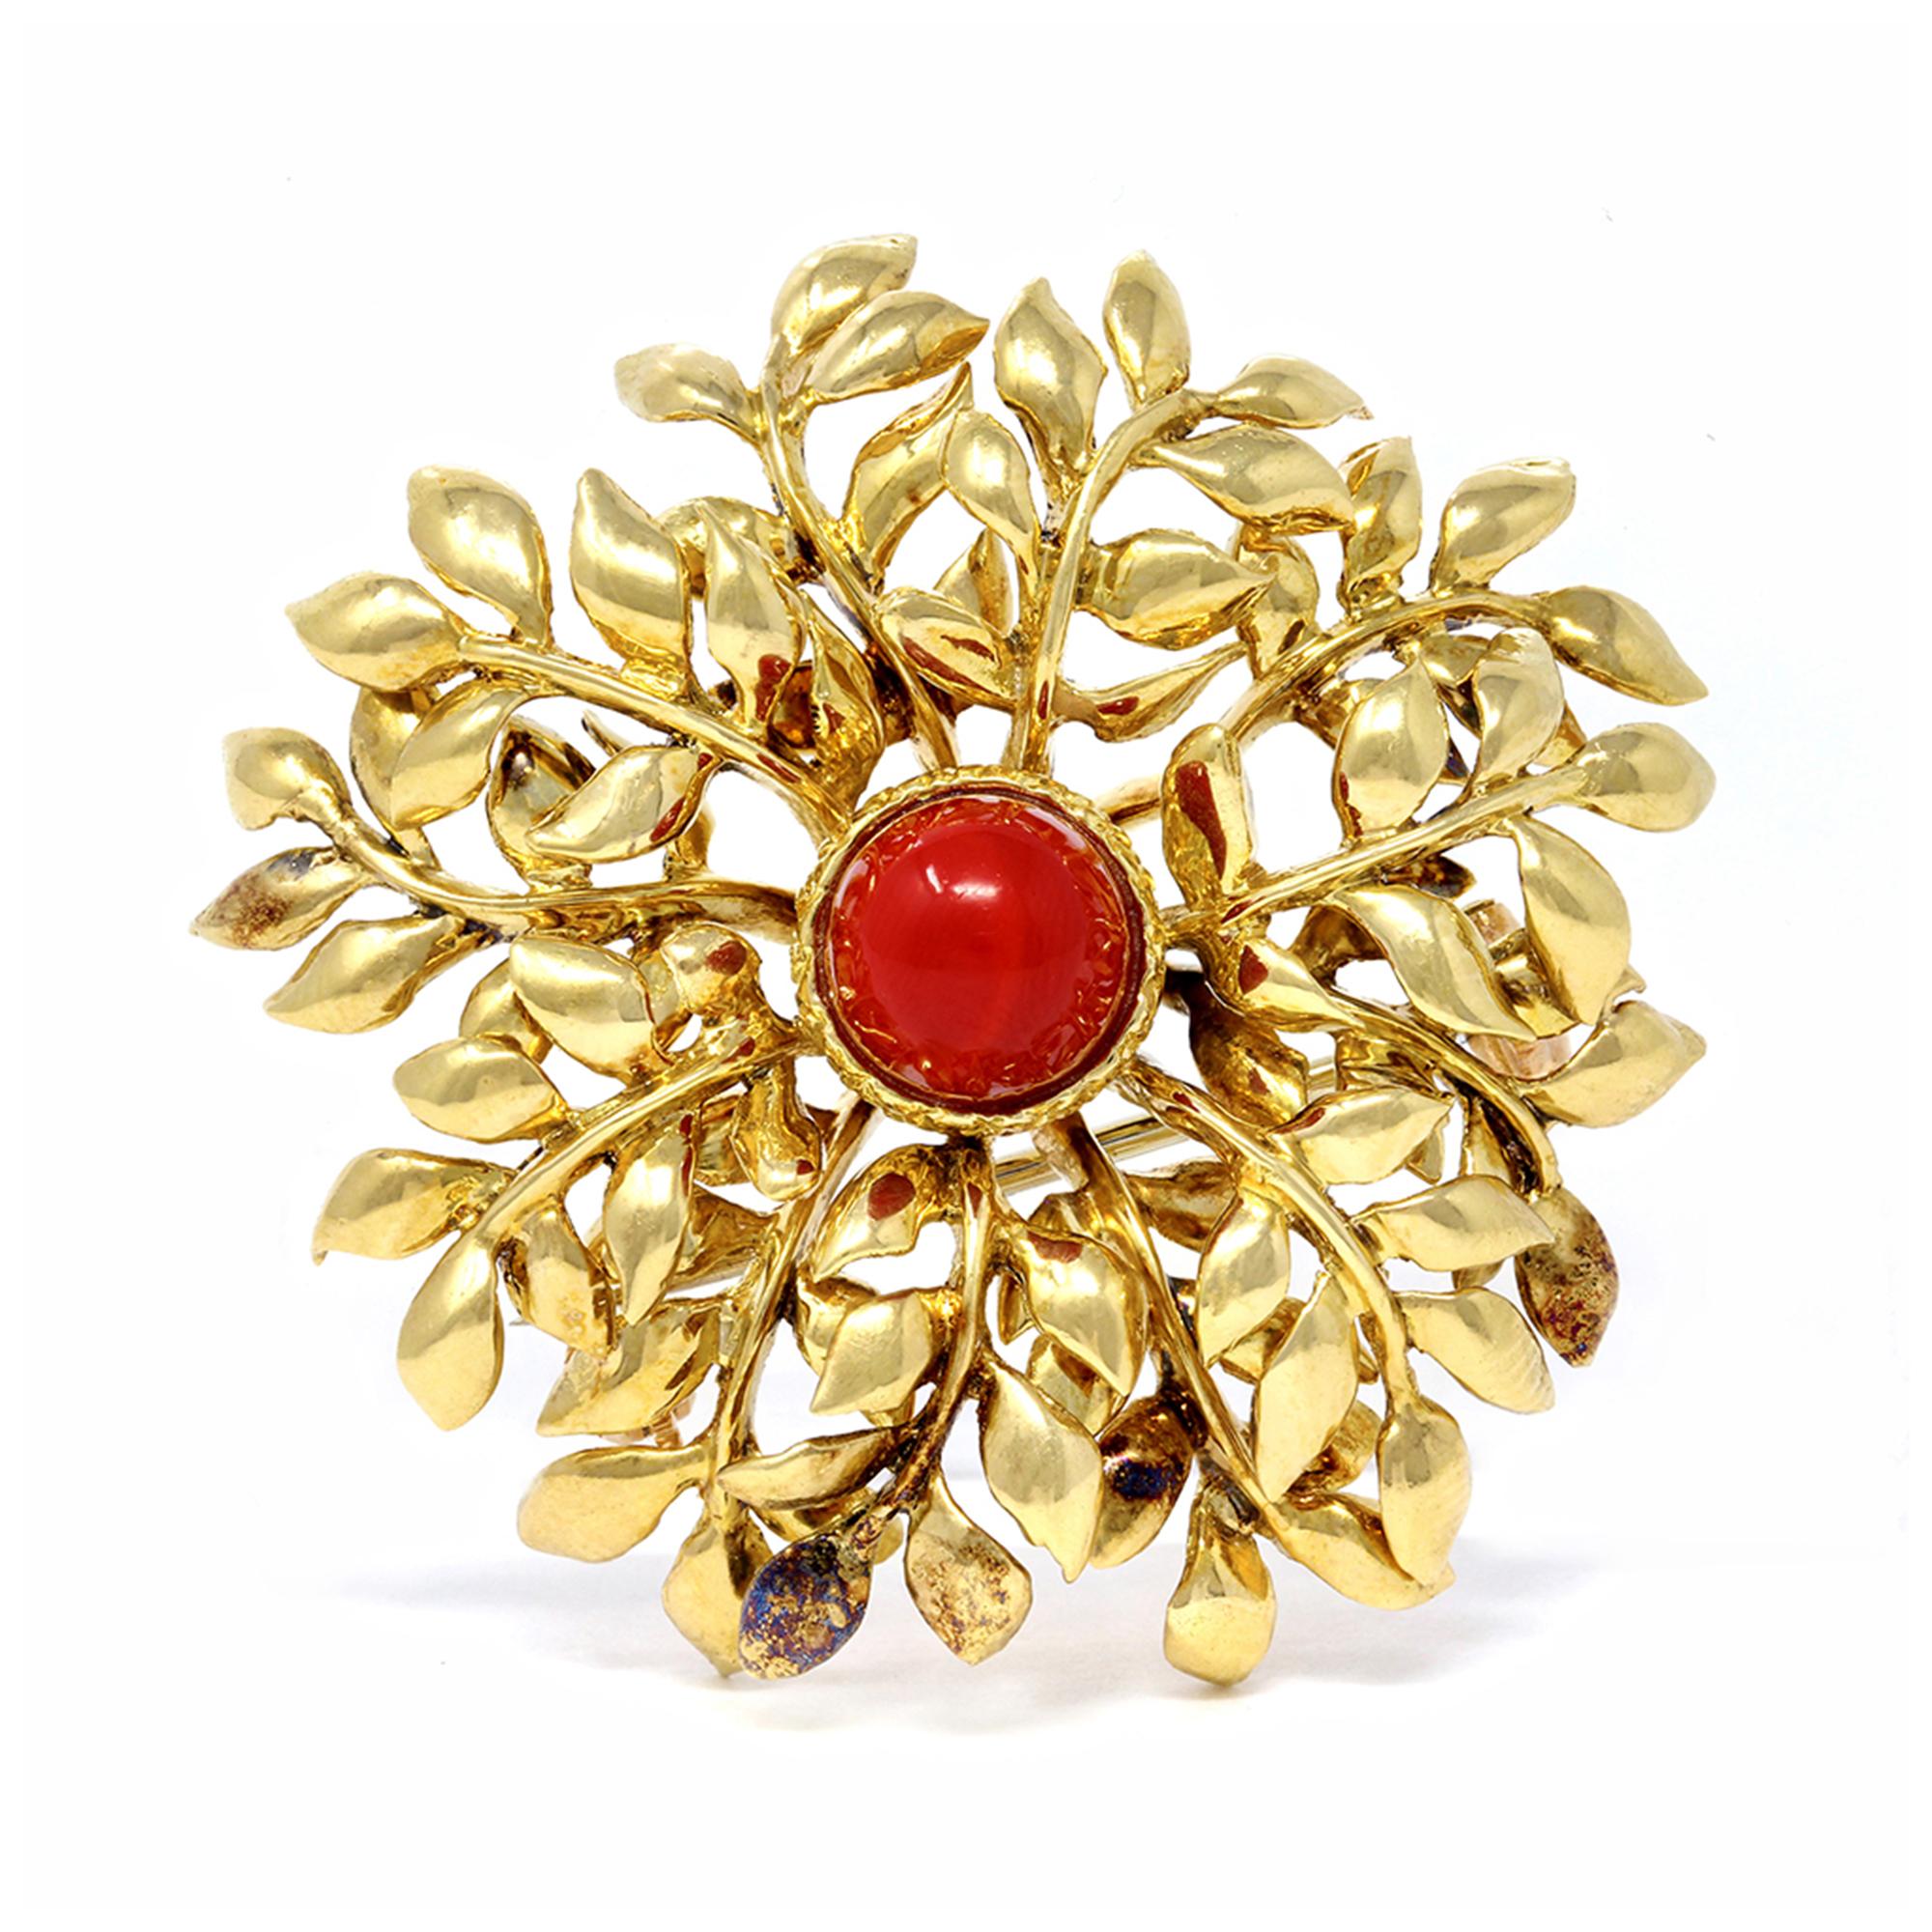 A Signed Tiffany leaf motif brooch with a dome shape coral in the center. This brooch was made in Italy circa 1979 and set in 18 karat yellow gold. The coral cabochon displays a deep red color. The brooch has a total weight of 19.5 grams and